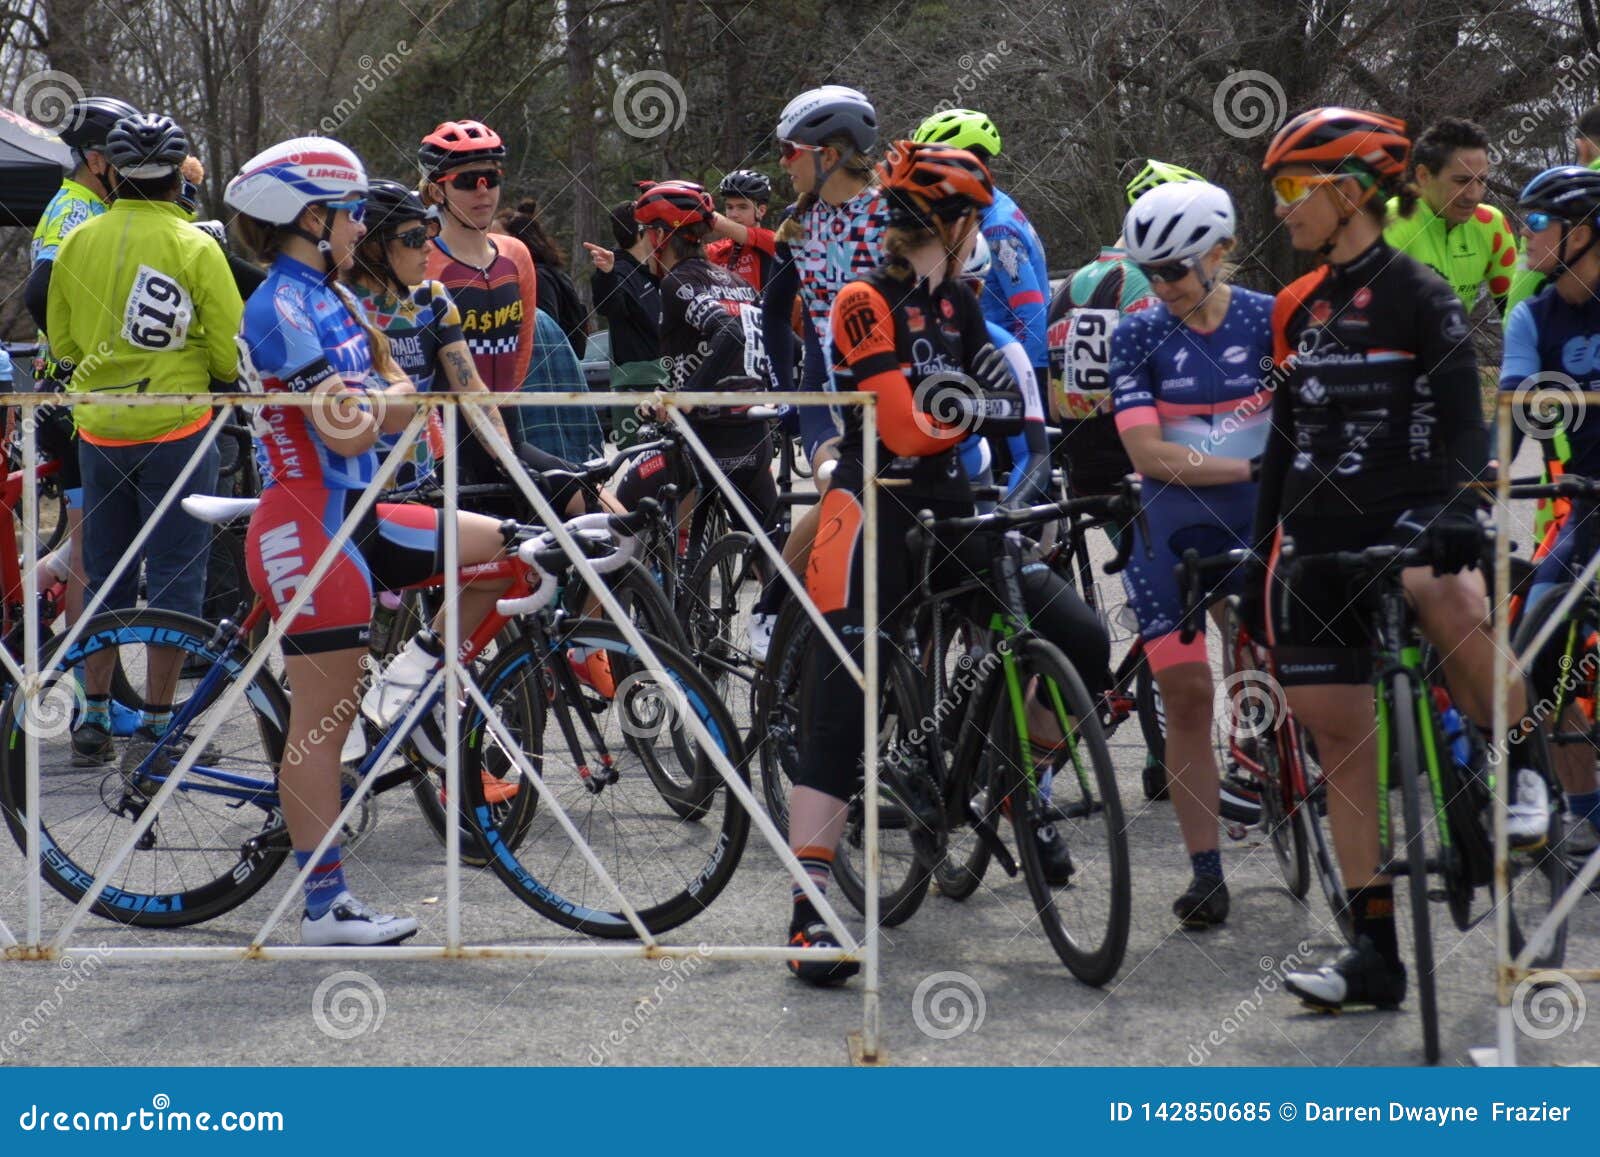 Tour Of St. Louis-The Carondelicious Circuit Race 2019 XX Editorial Image - Image of events ...